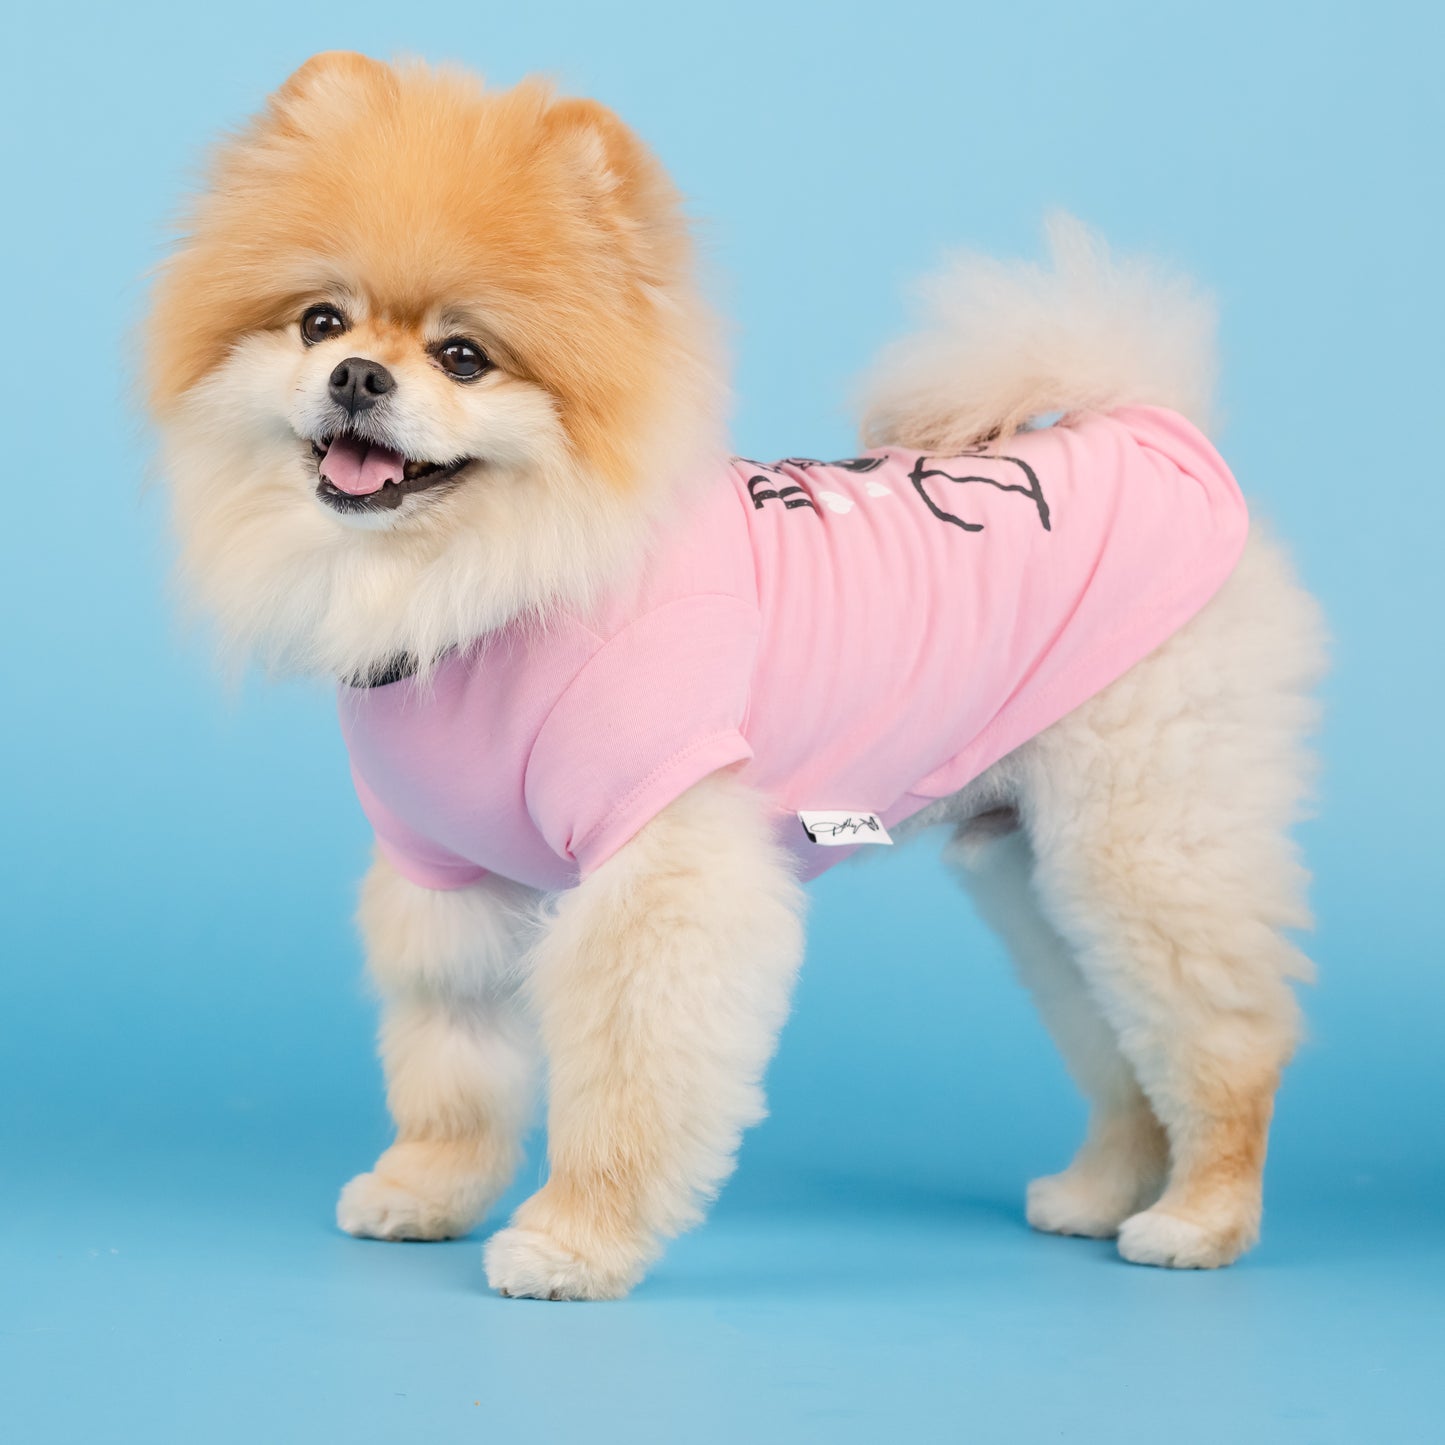 Raised On Dolly Pet T-Shirt - Pink